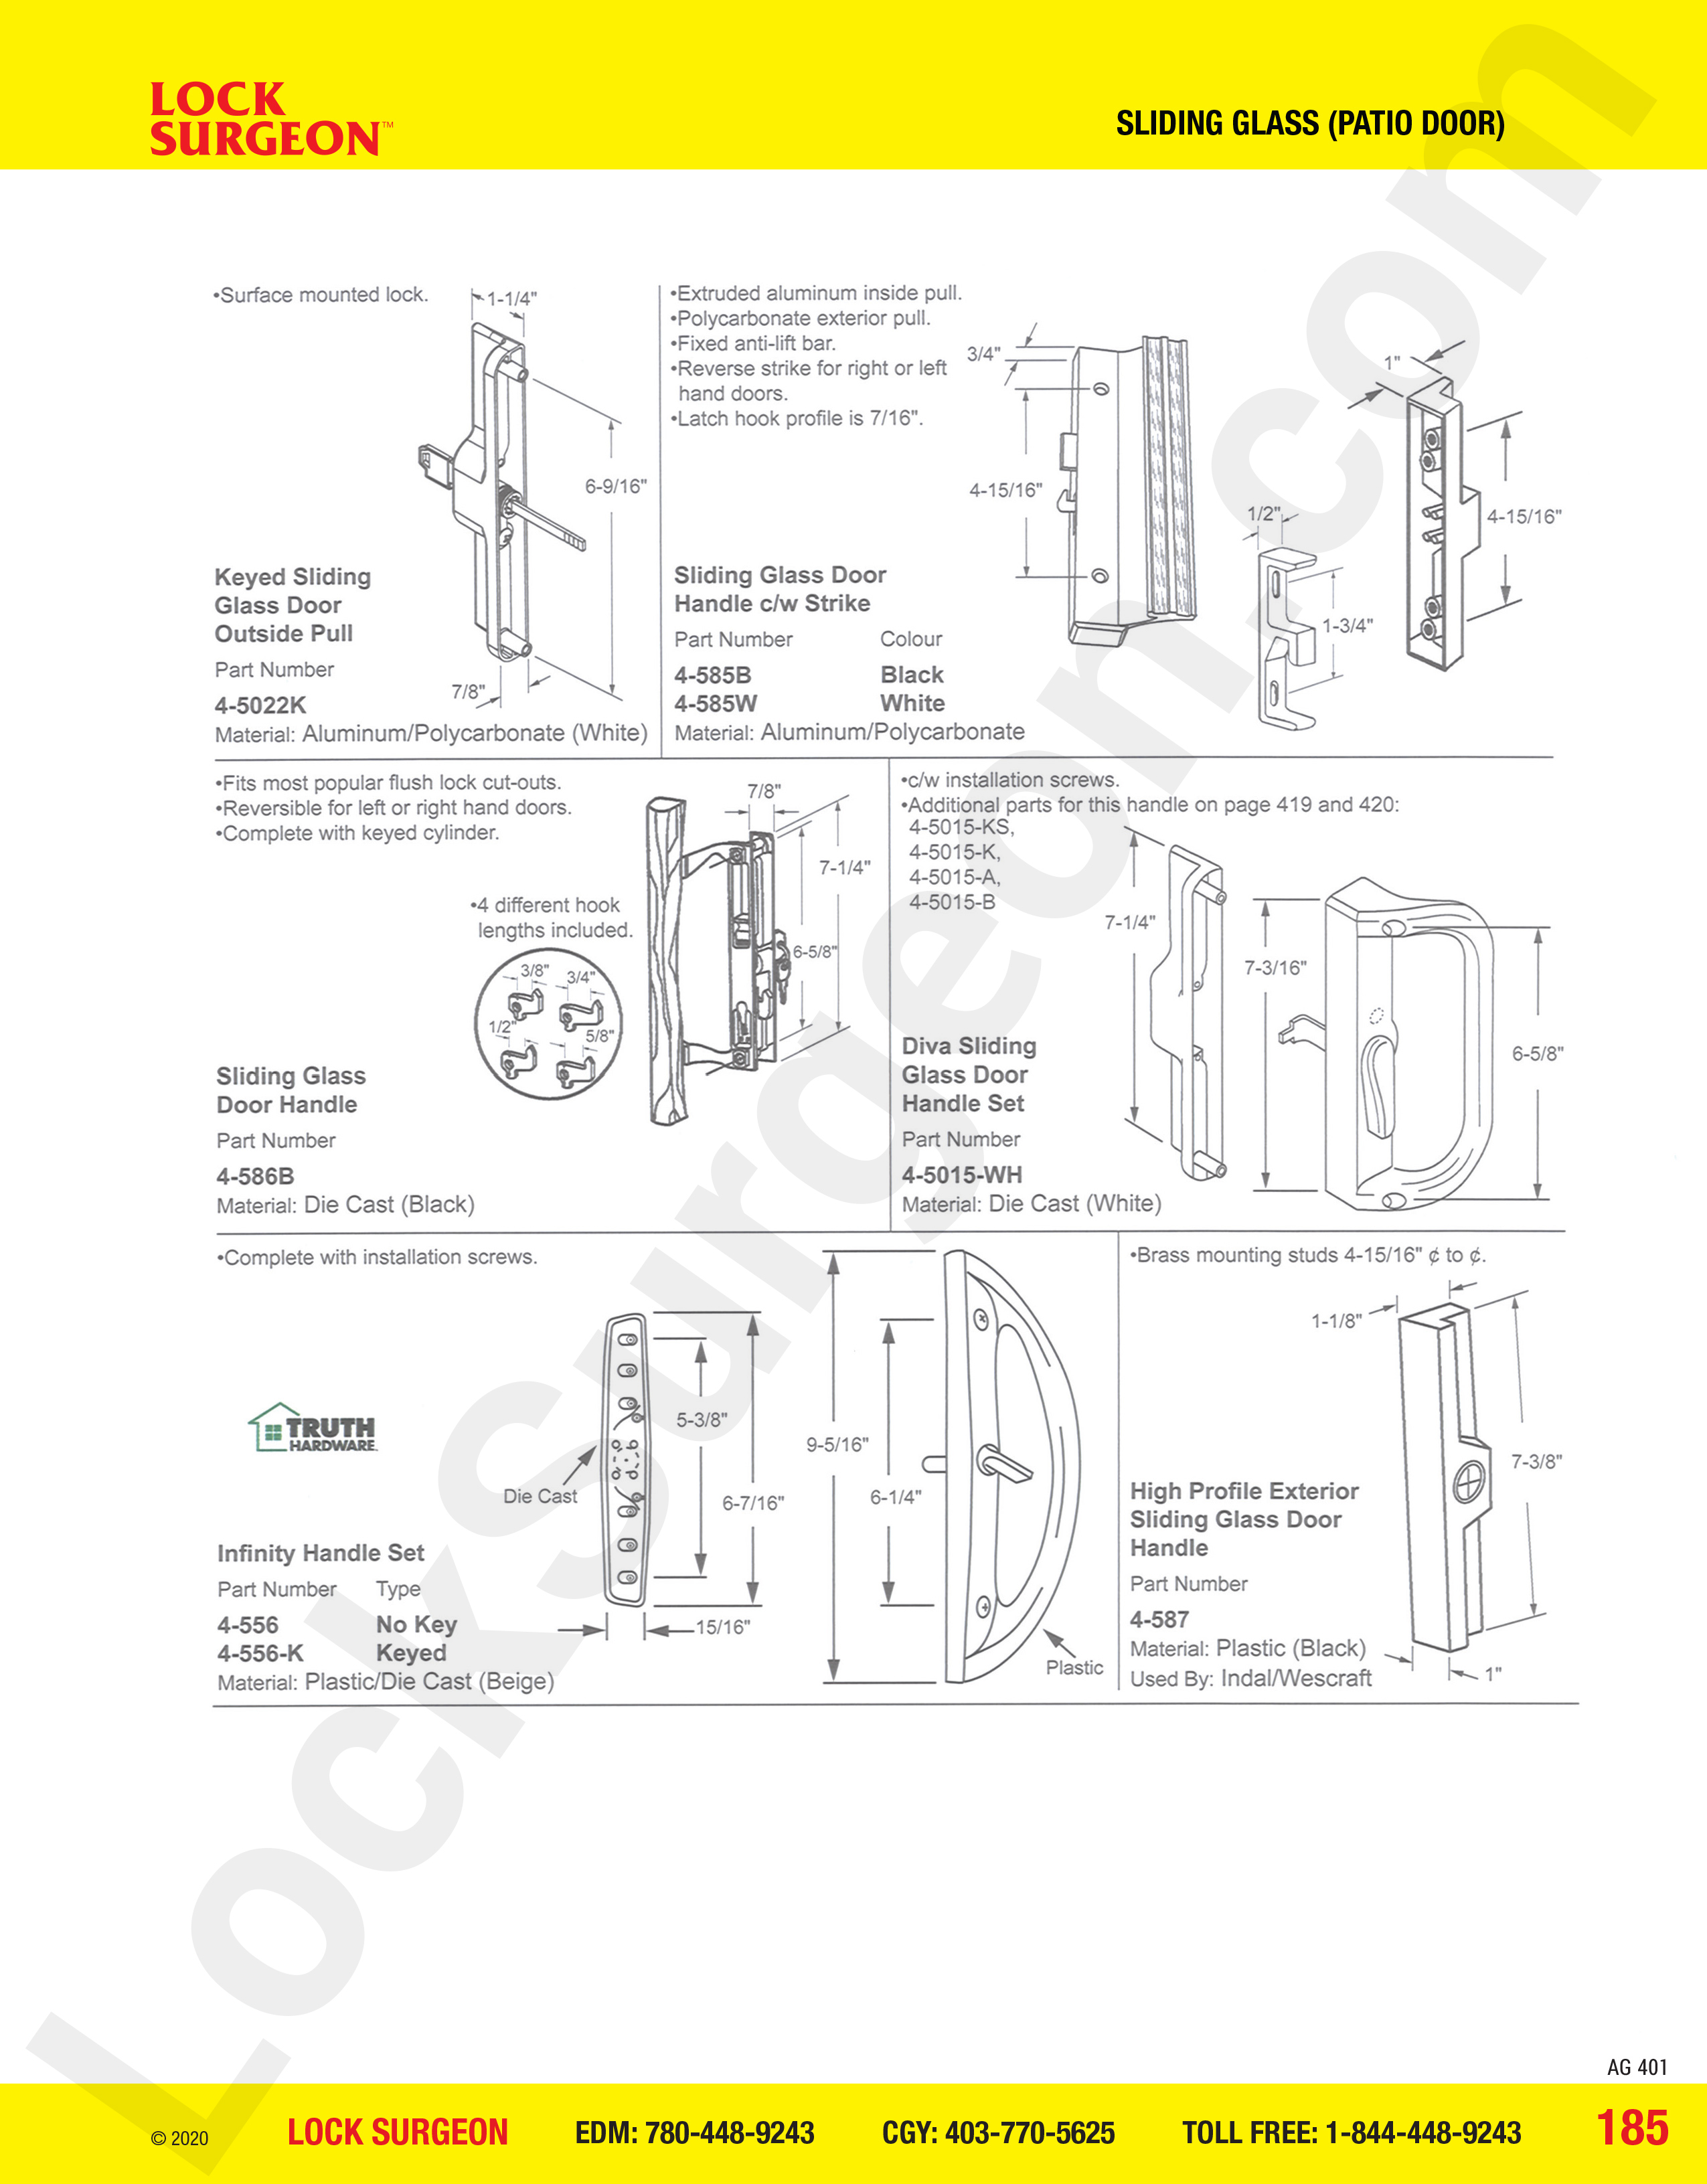 Sliding glass patio door handles for Truth Hardware with strike and four hook lengths included.